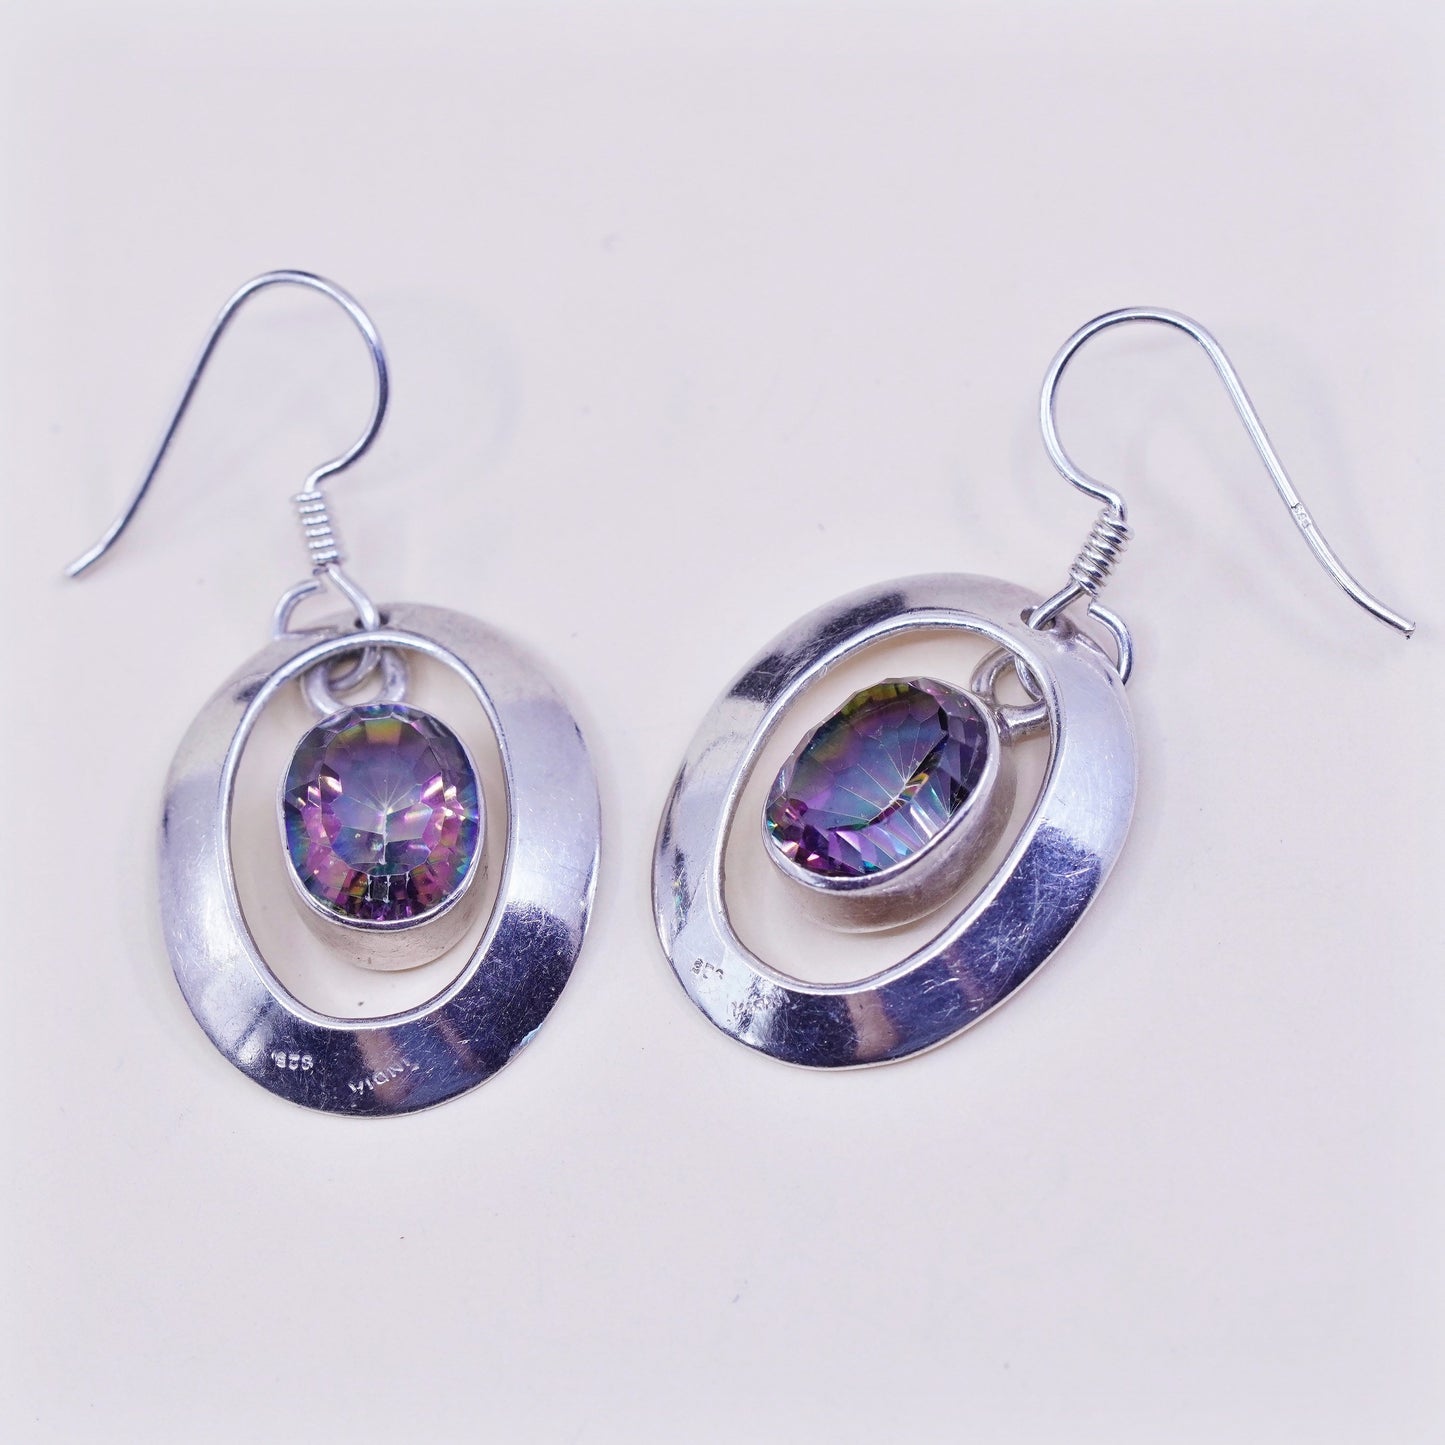 Vintage sterling 925 silver handmade earrings with rainbow topaz drops, stamped 925